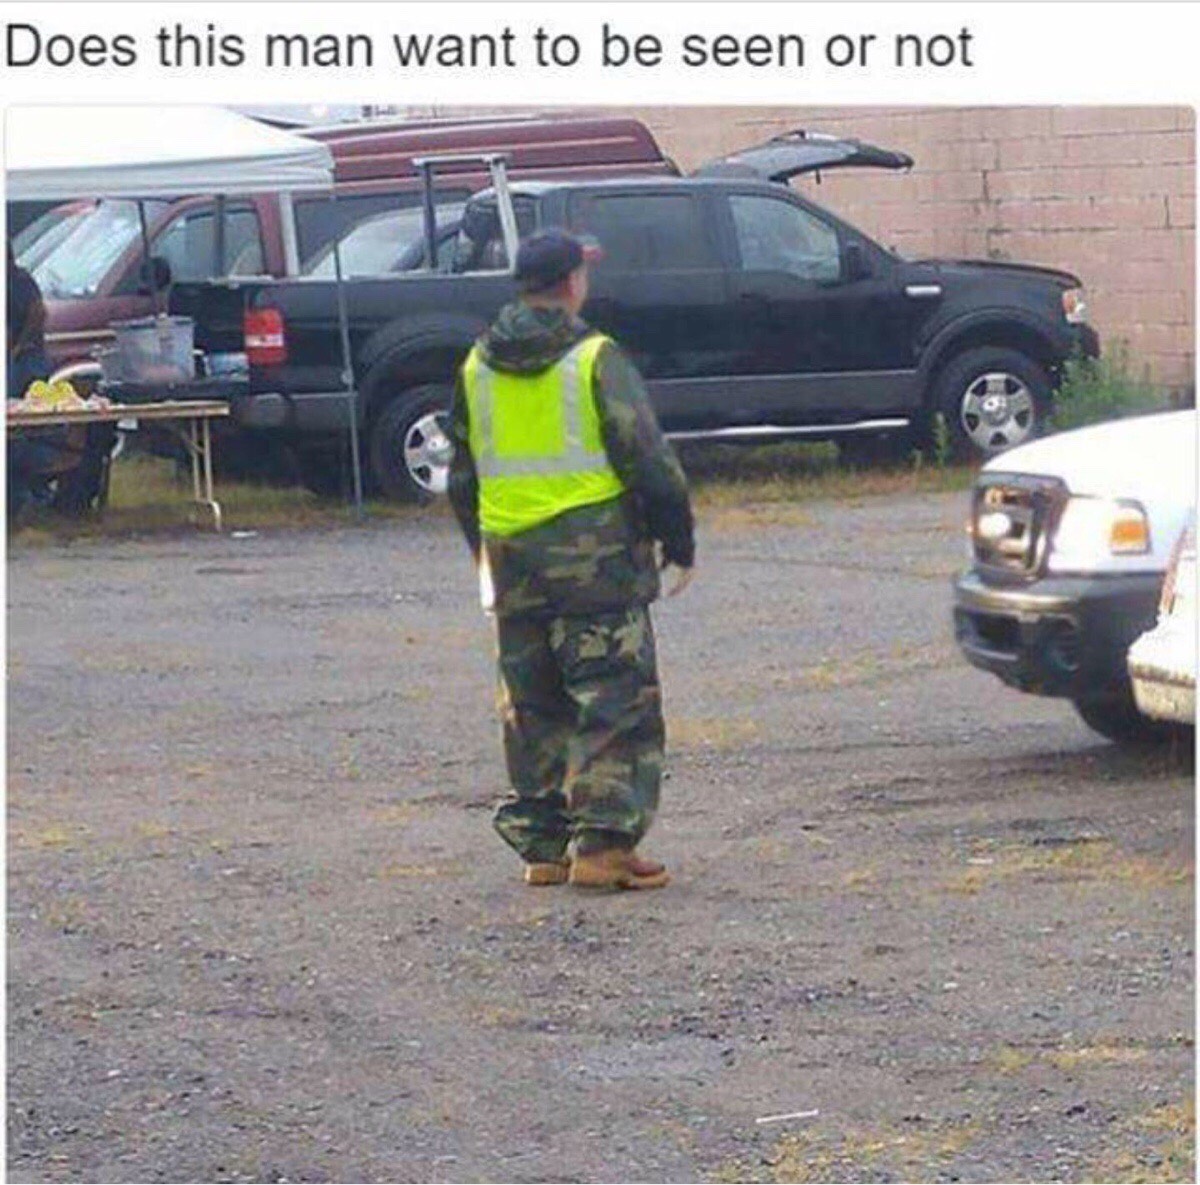 does this man want to be seen - Does this man want to be seen or not